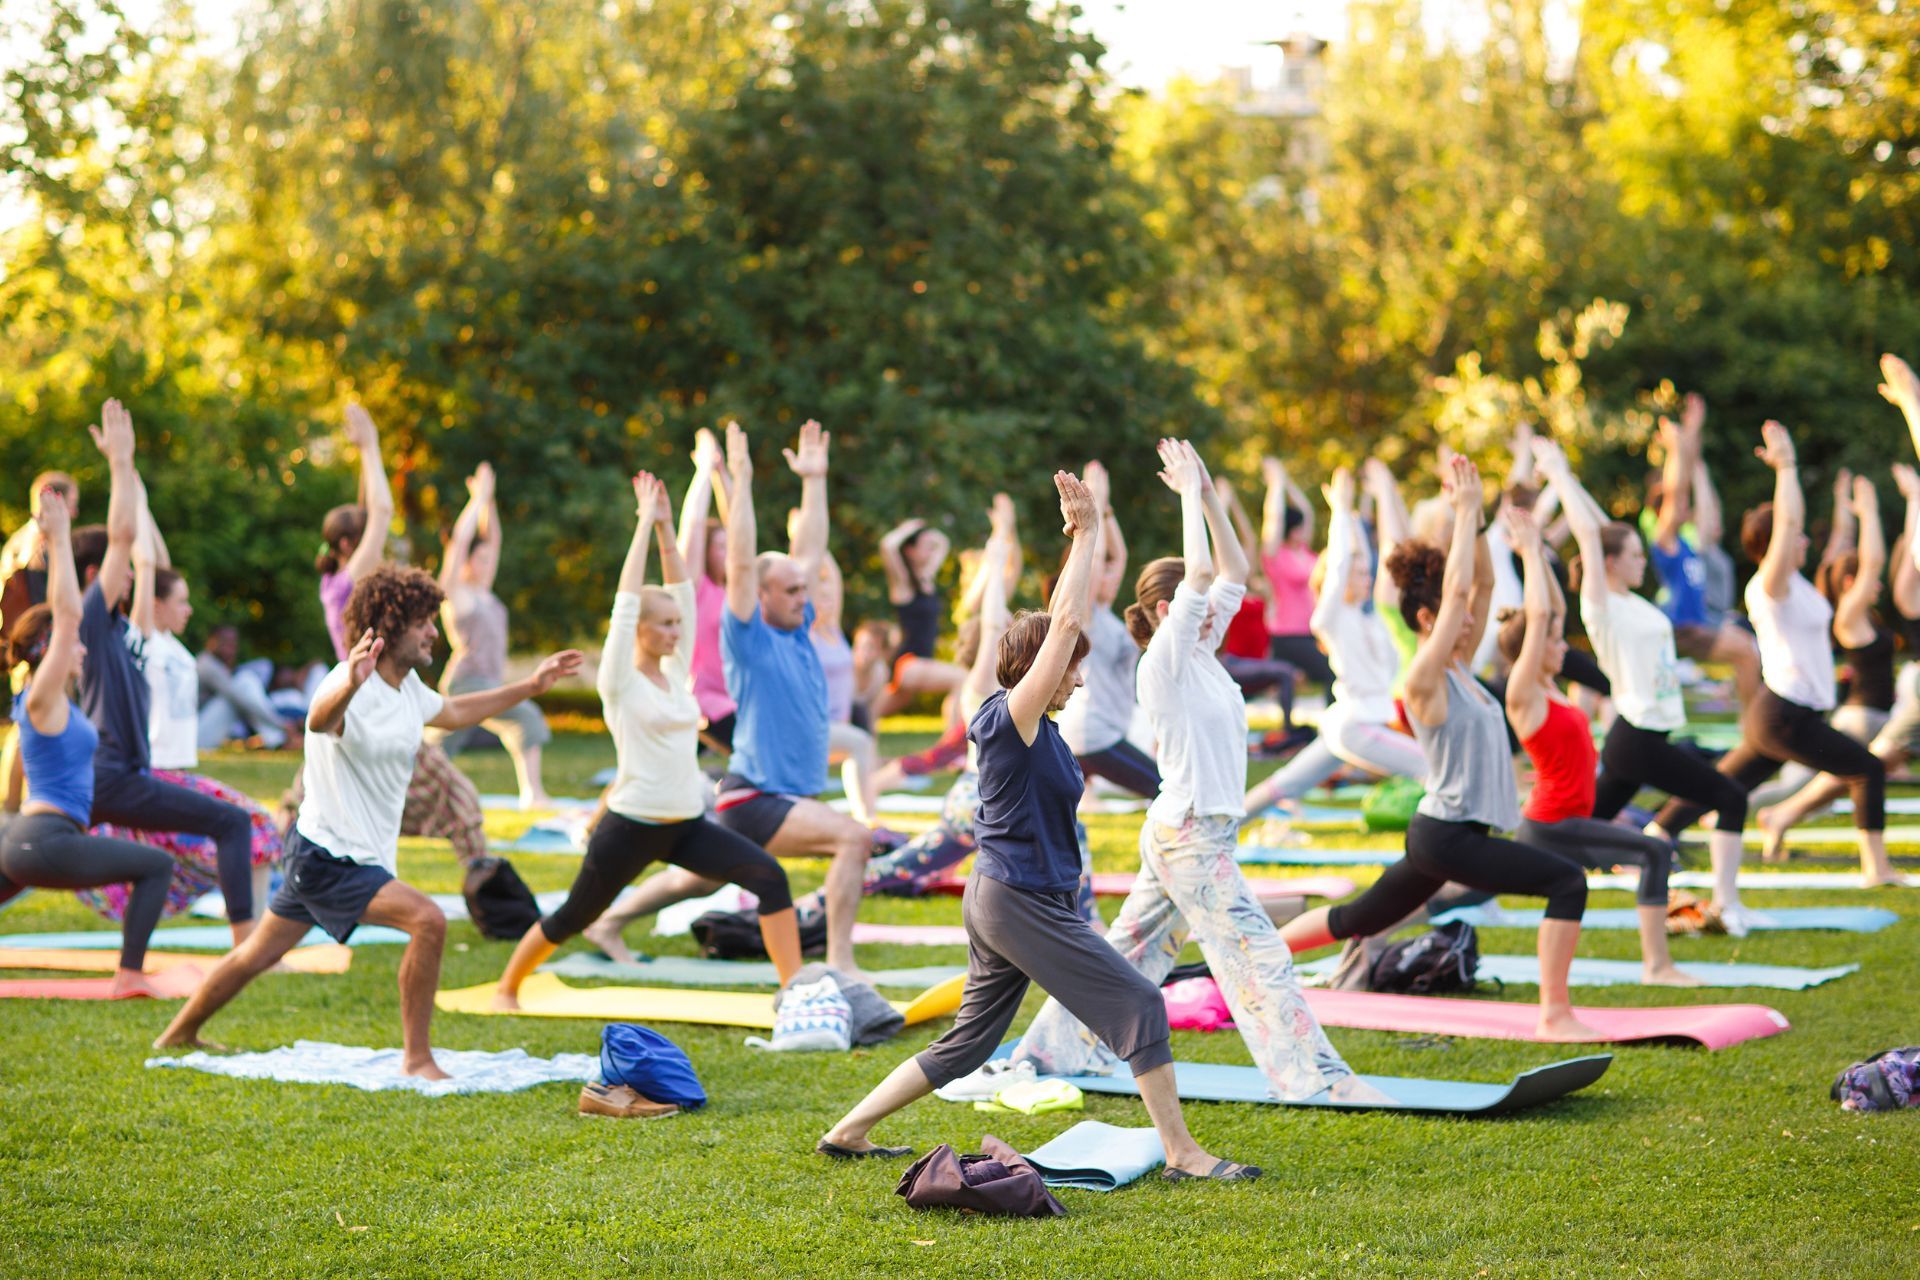 a group of people are doing yoga in a park .